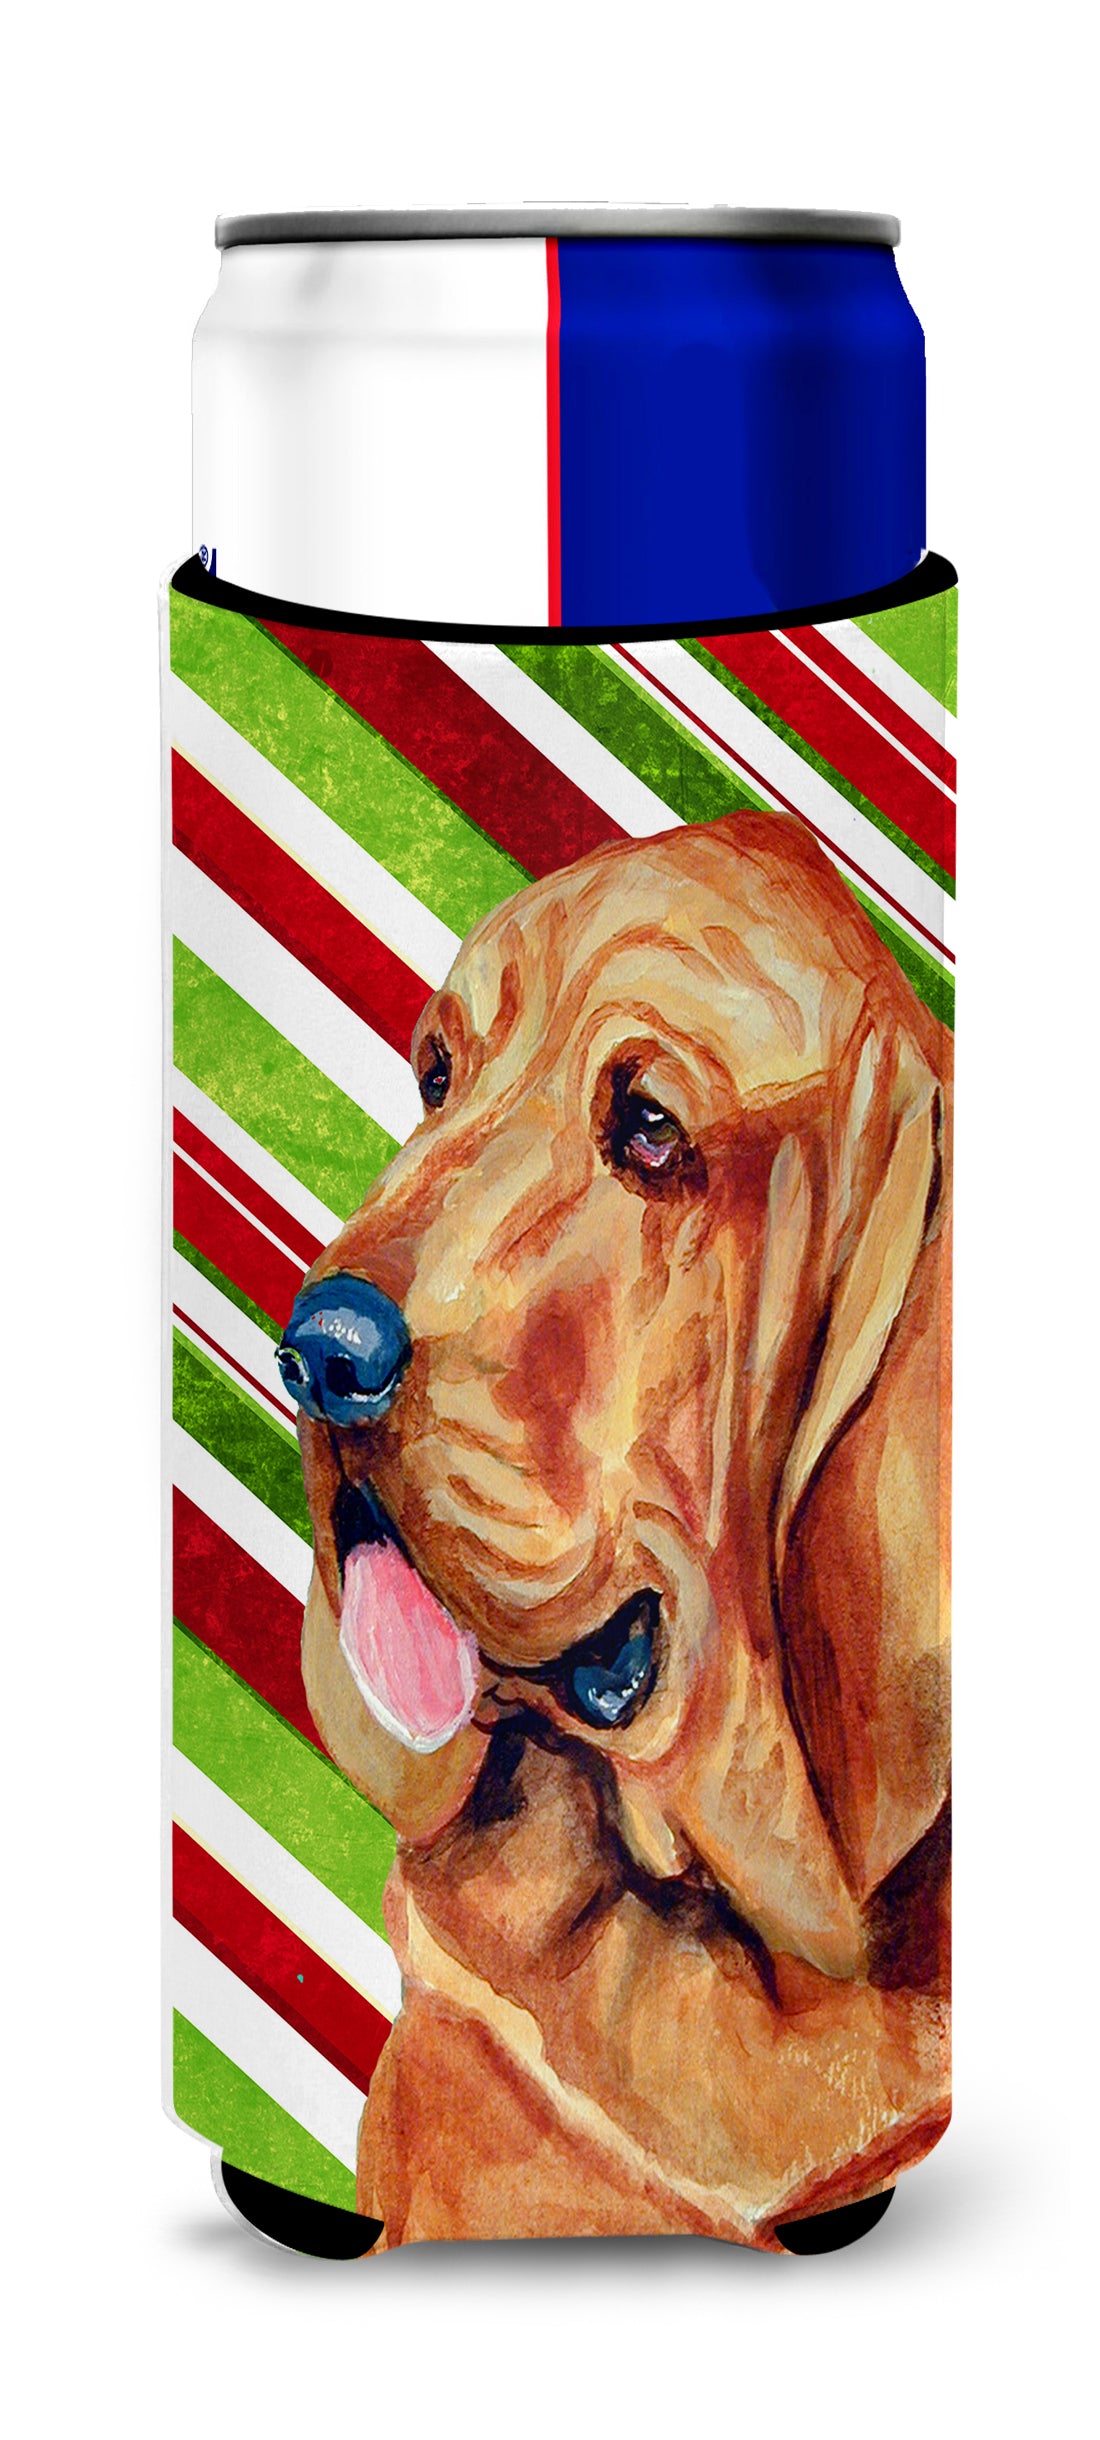 Bloodhound Candy Cane Holiday Christmas Ultra Beverage Insulators for slim cans LH9241MUK.